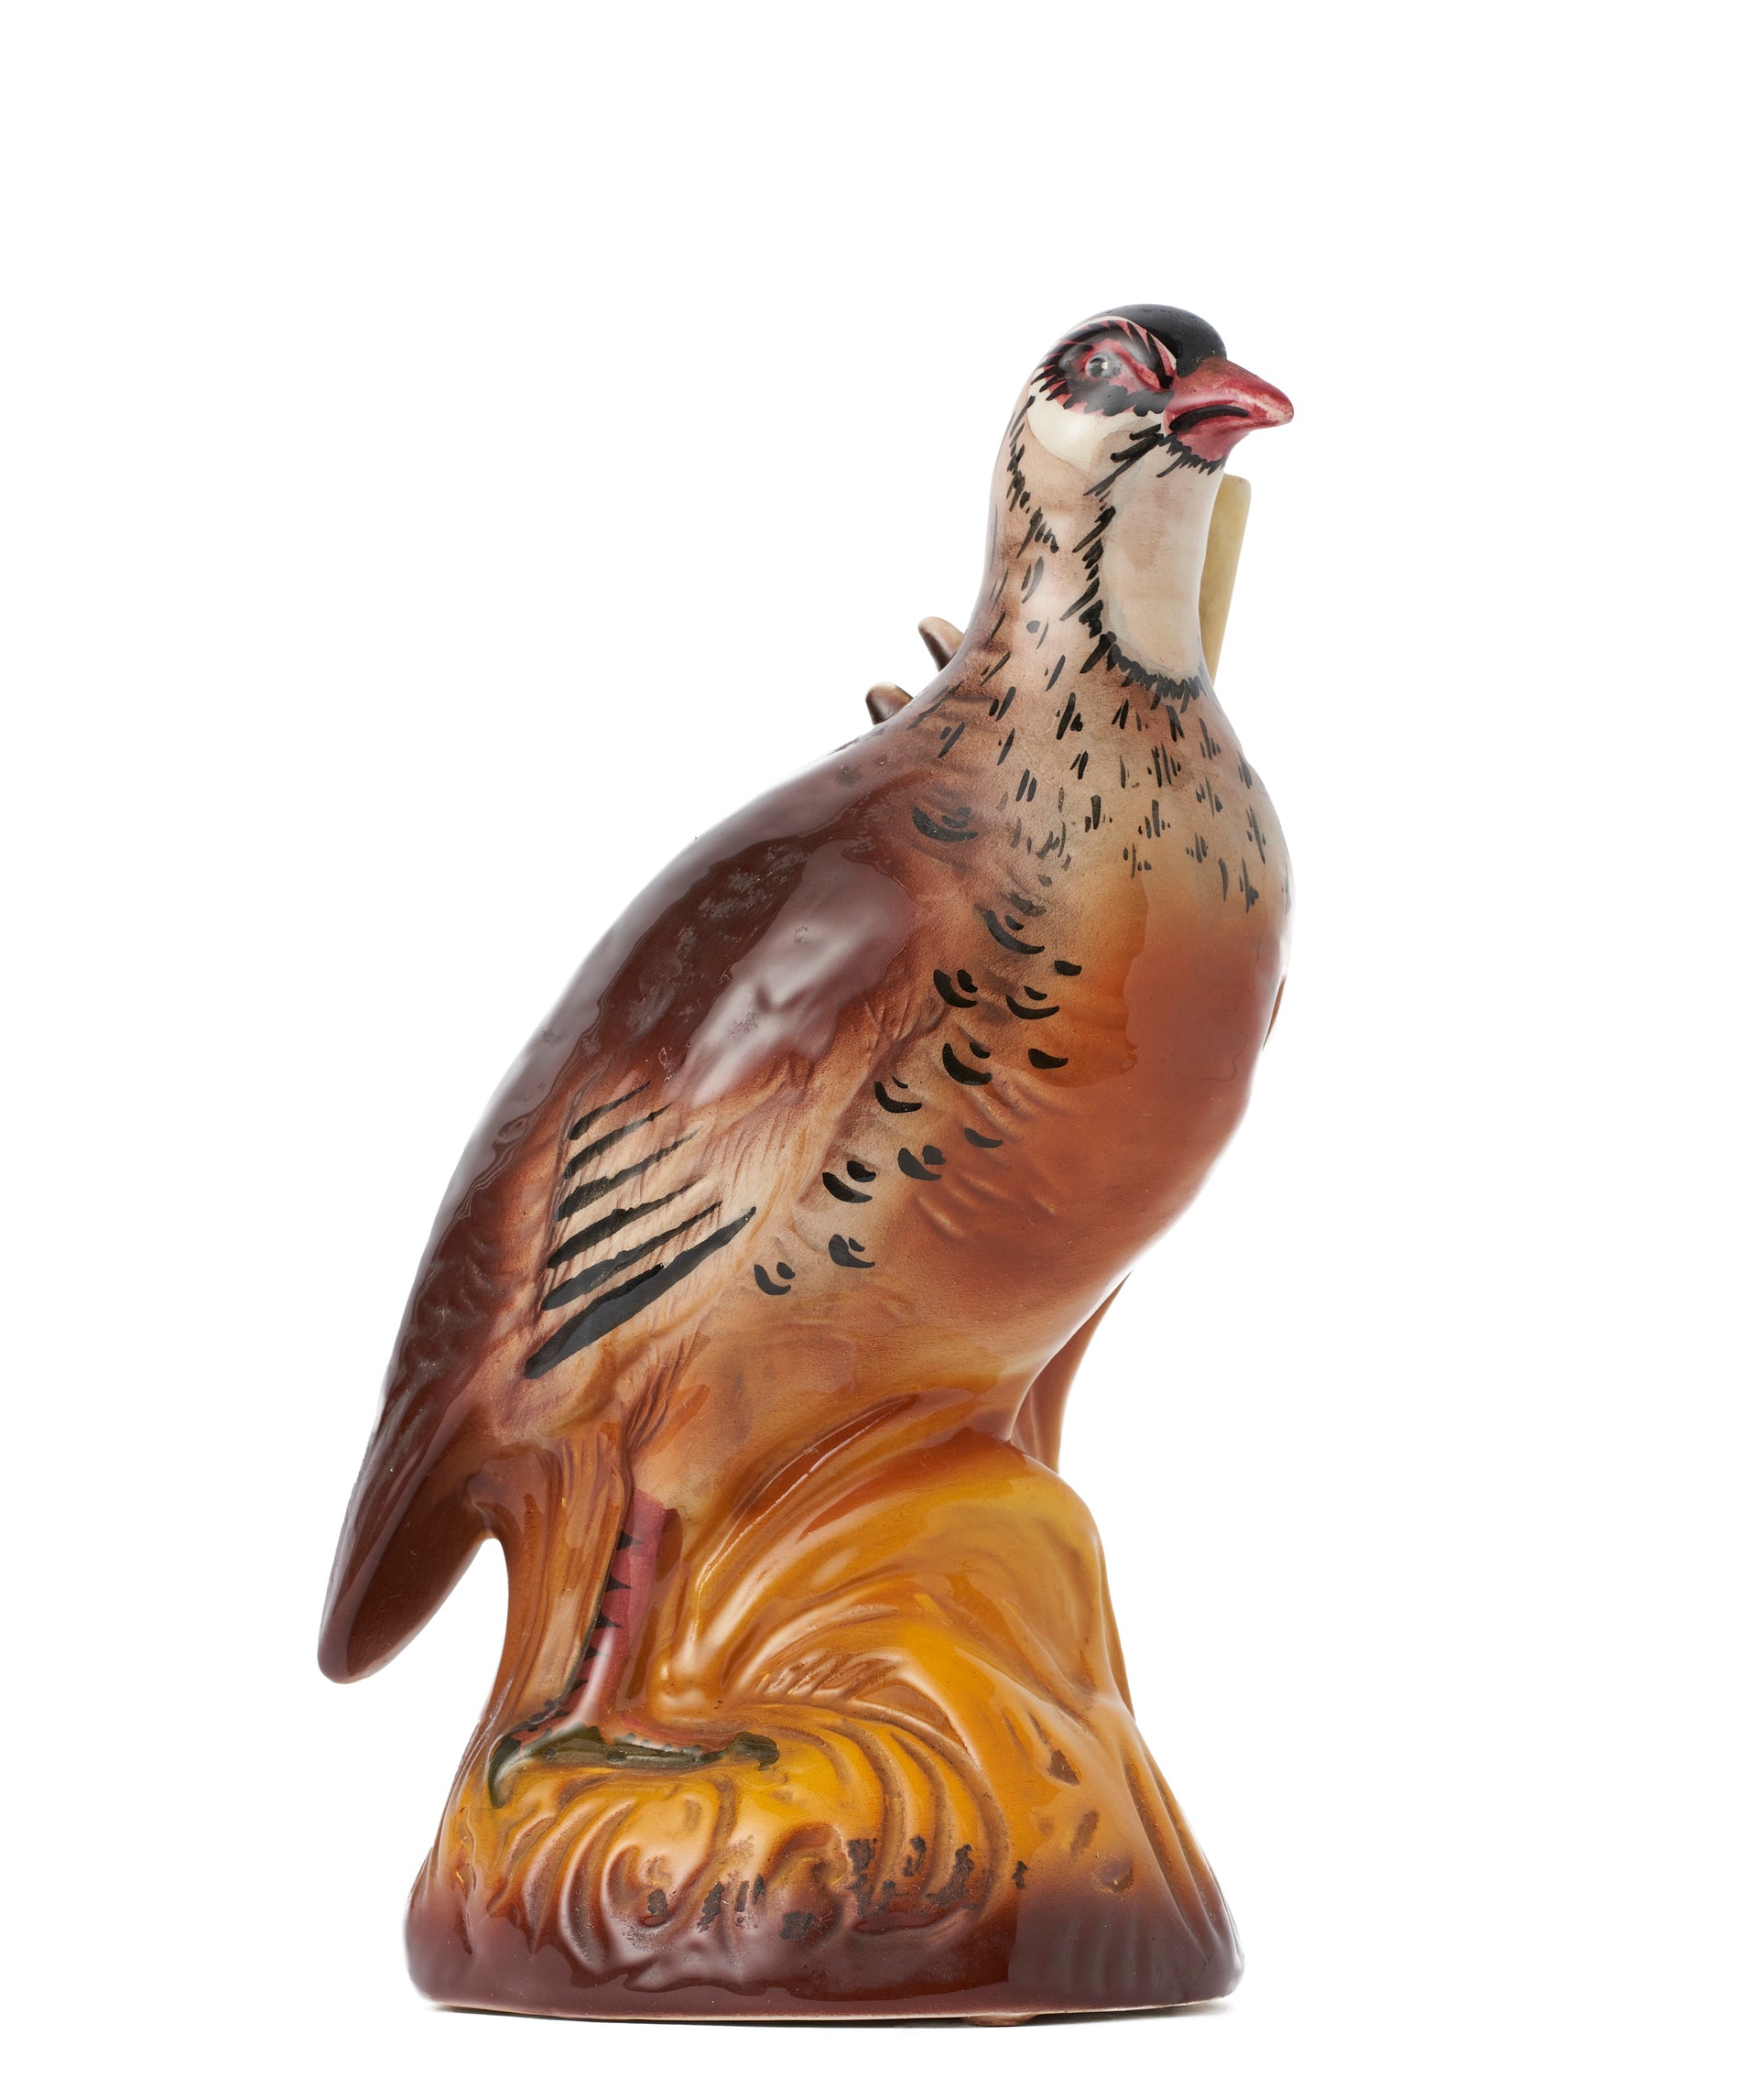 SOLD A vintage French Garnier liqueur bottle in the form of a partridge